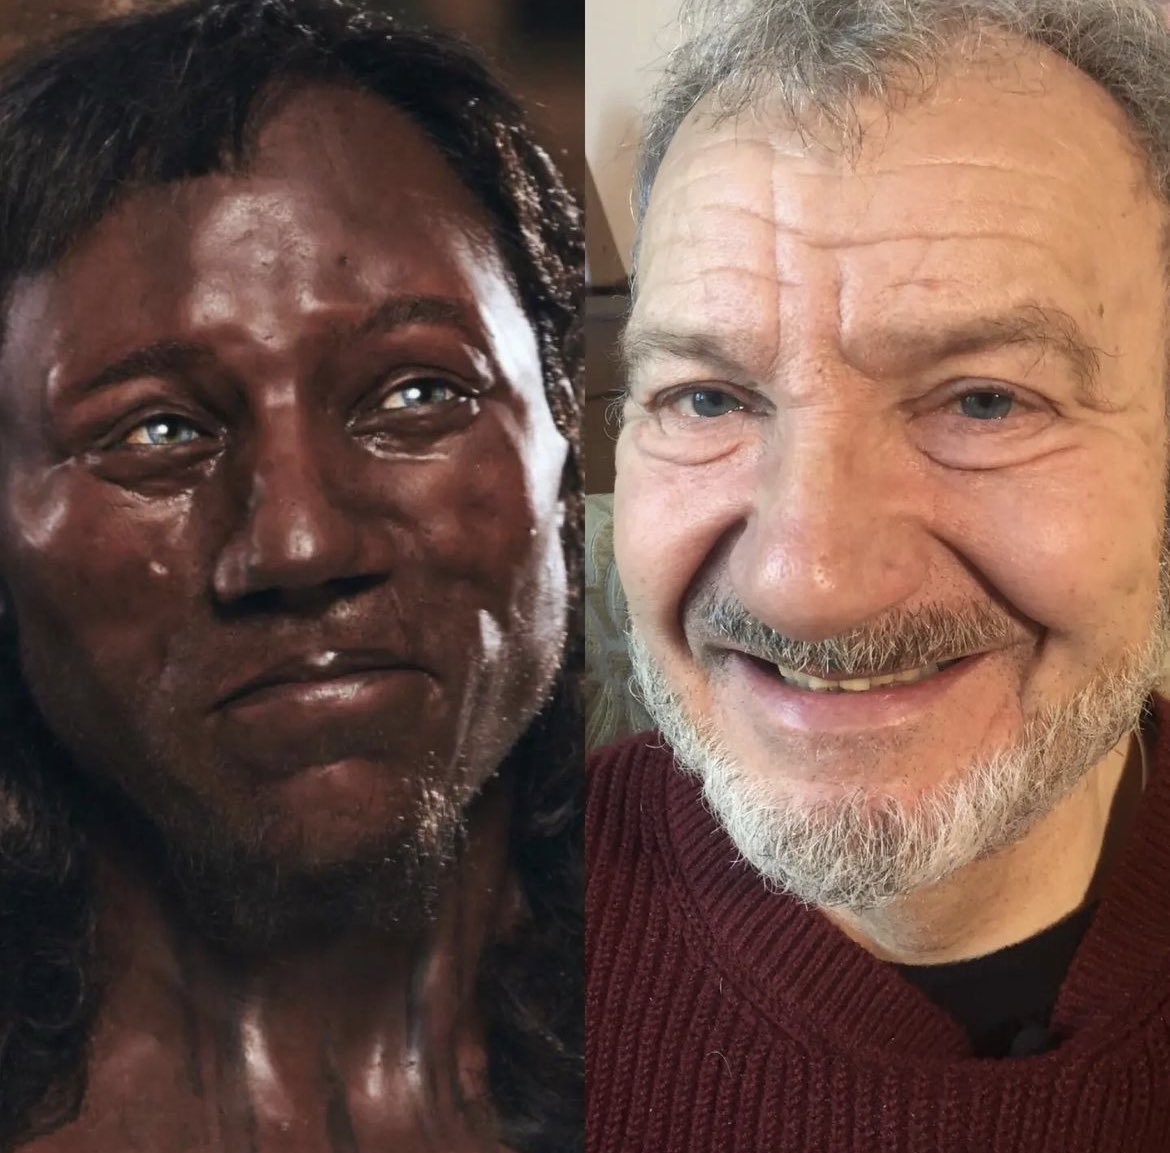 Introducing Cheddar Man, a man from 10,000 years ago whose descendant is alive today. Cheddar Man refers to an early Mesolithic individual discovered in Gough's cave in Cheddar, England, back in 1903. He is believed to have met a violent end in his twenties. Through DNA analysis,